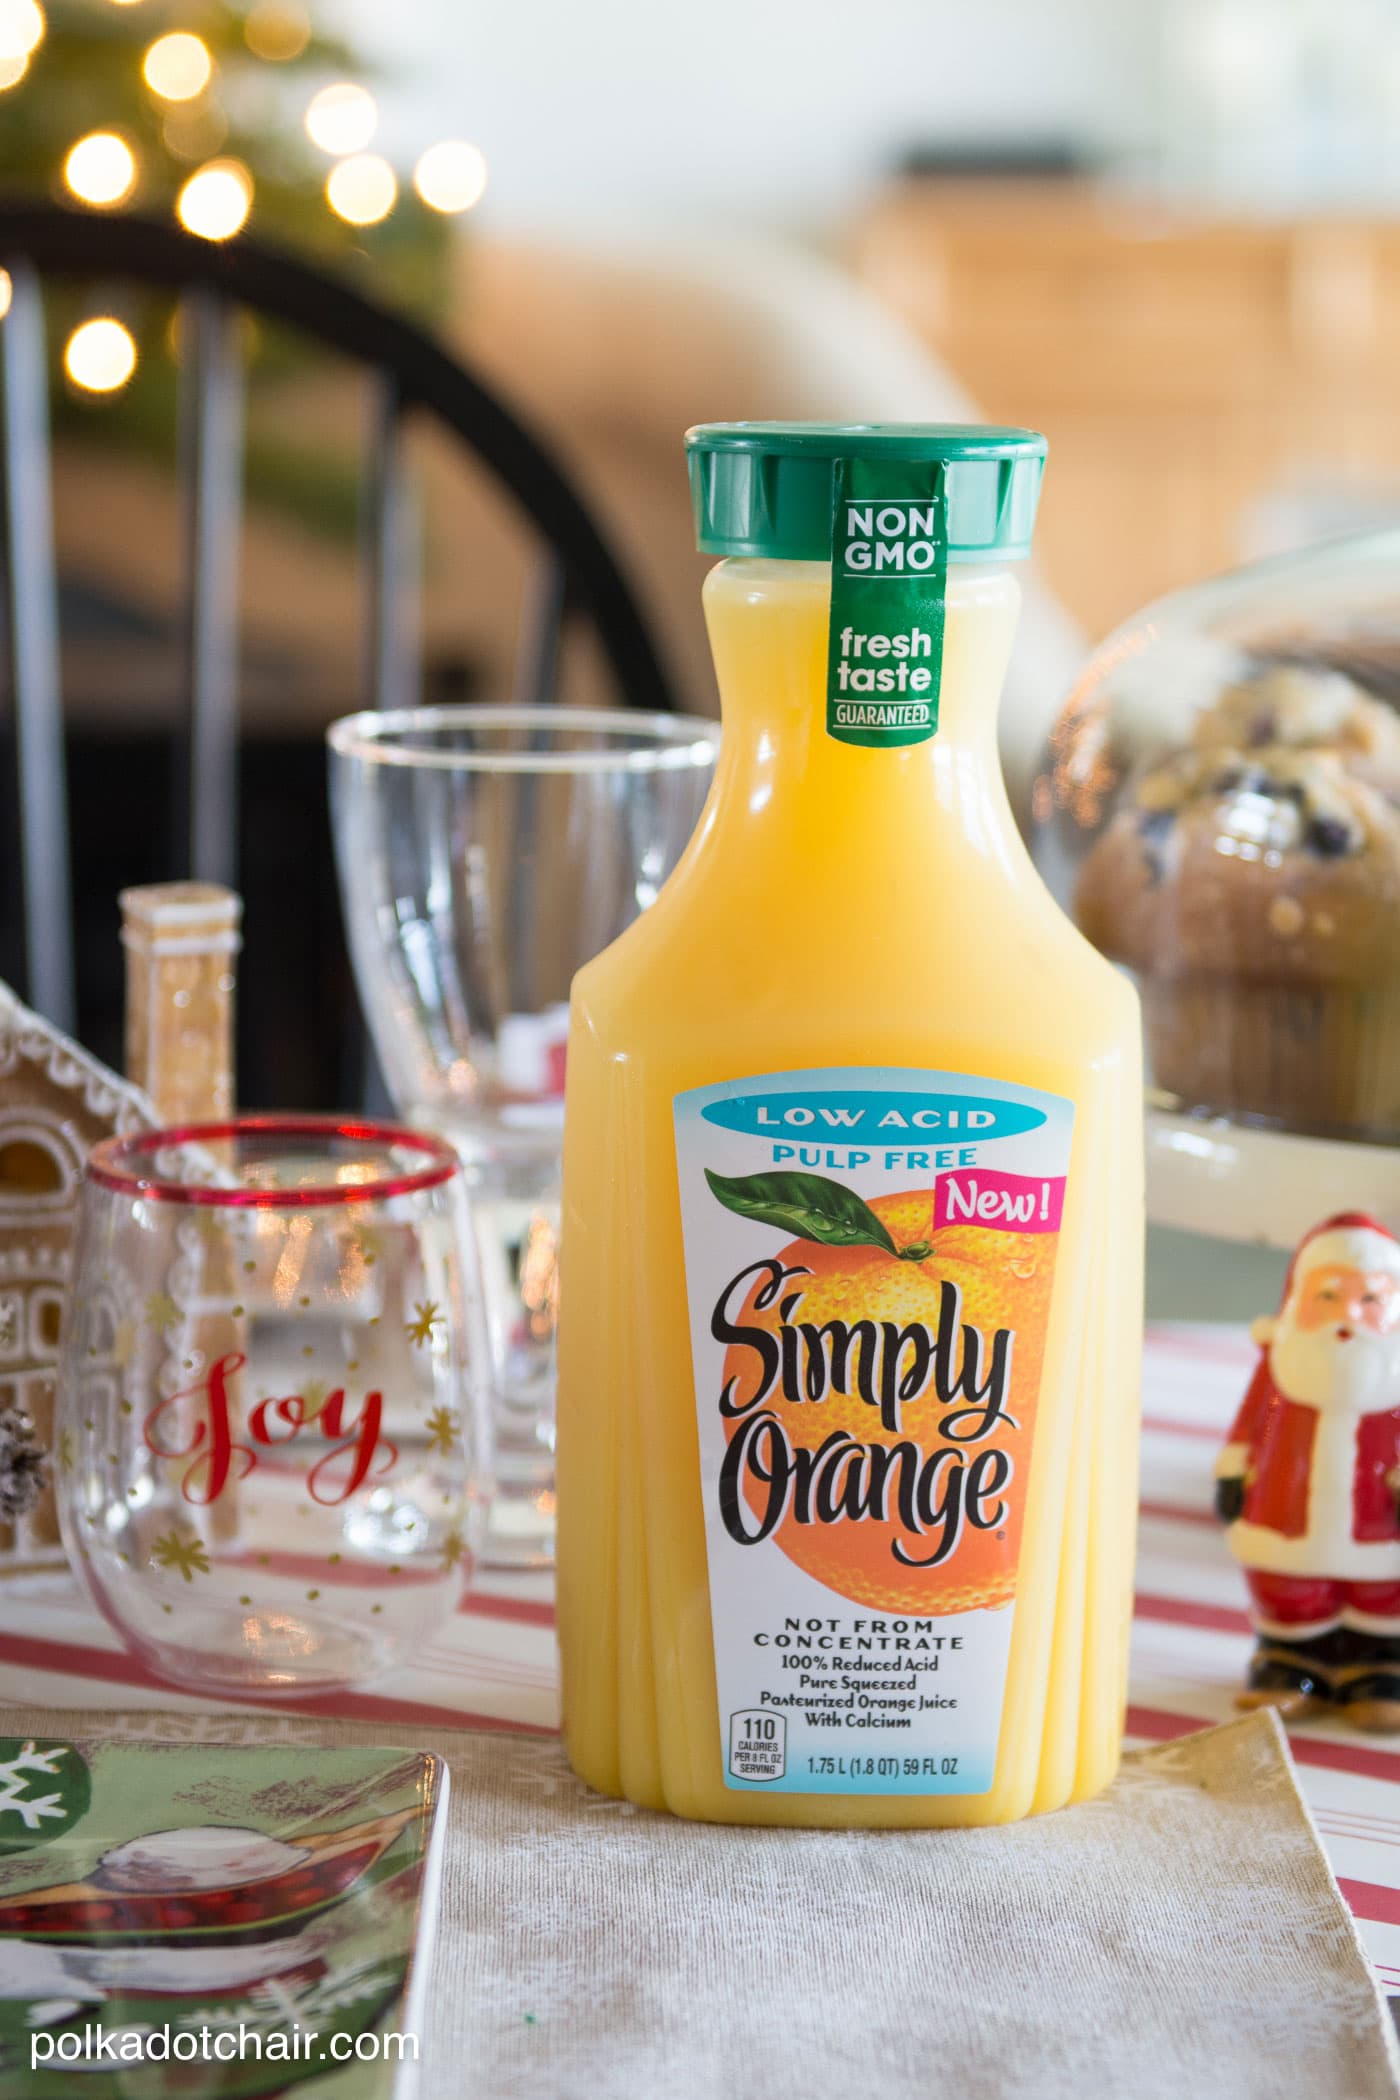 Recipe for a Vanilla Orange Slush, a perfect Christmas morning drink. Plus lots of other cute ideas for table setting and decorating ideas for Christmas morning breakfast